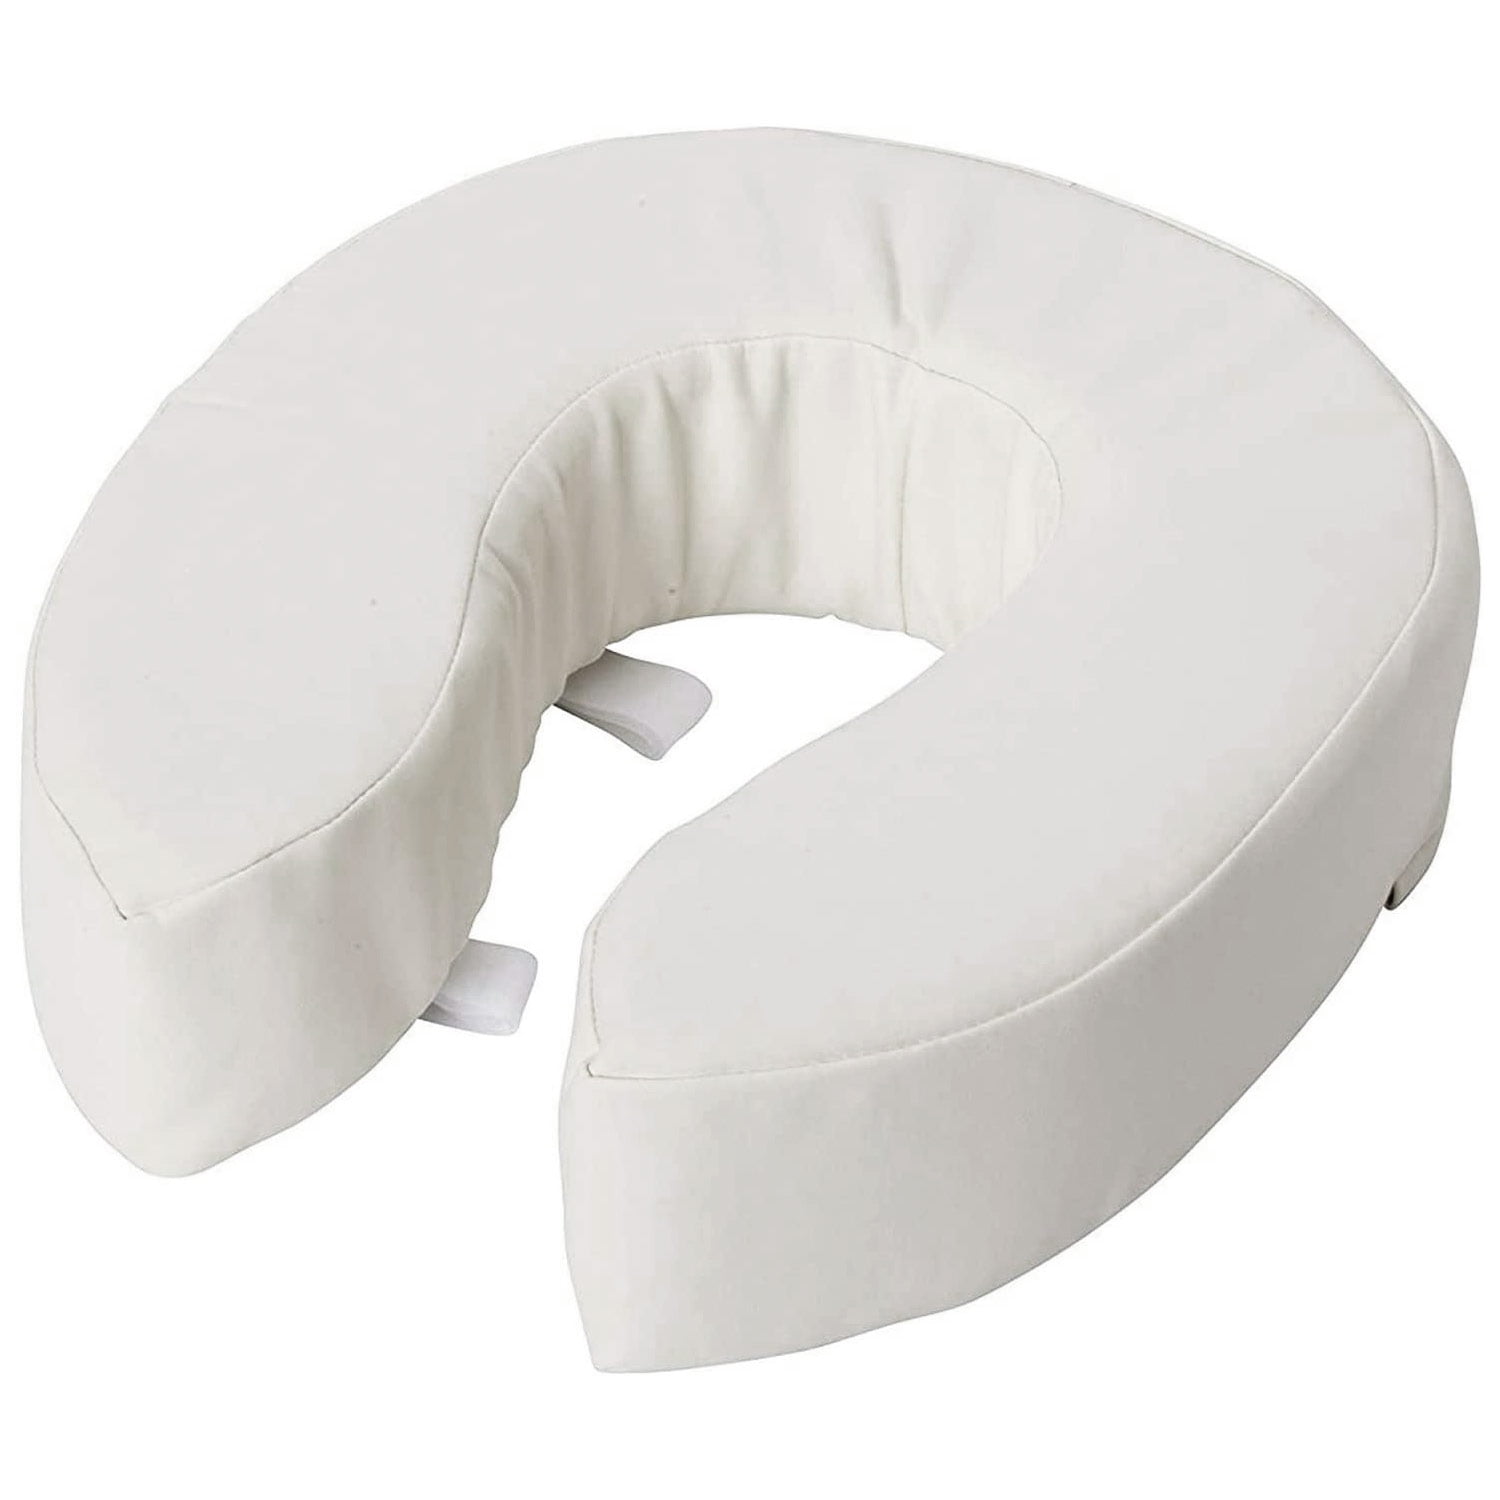 SolutionBased Pediatric Seat Cushion 6 Commode Opening (SCP1